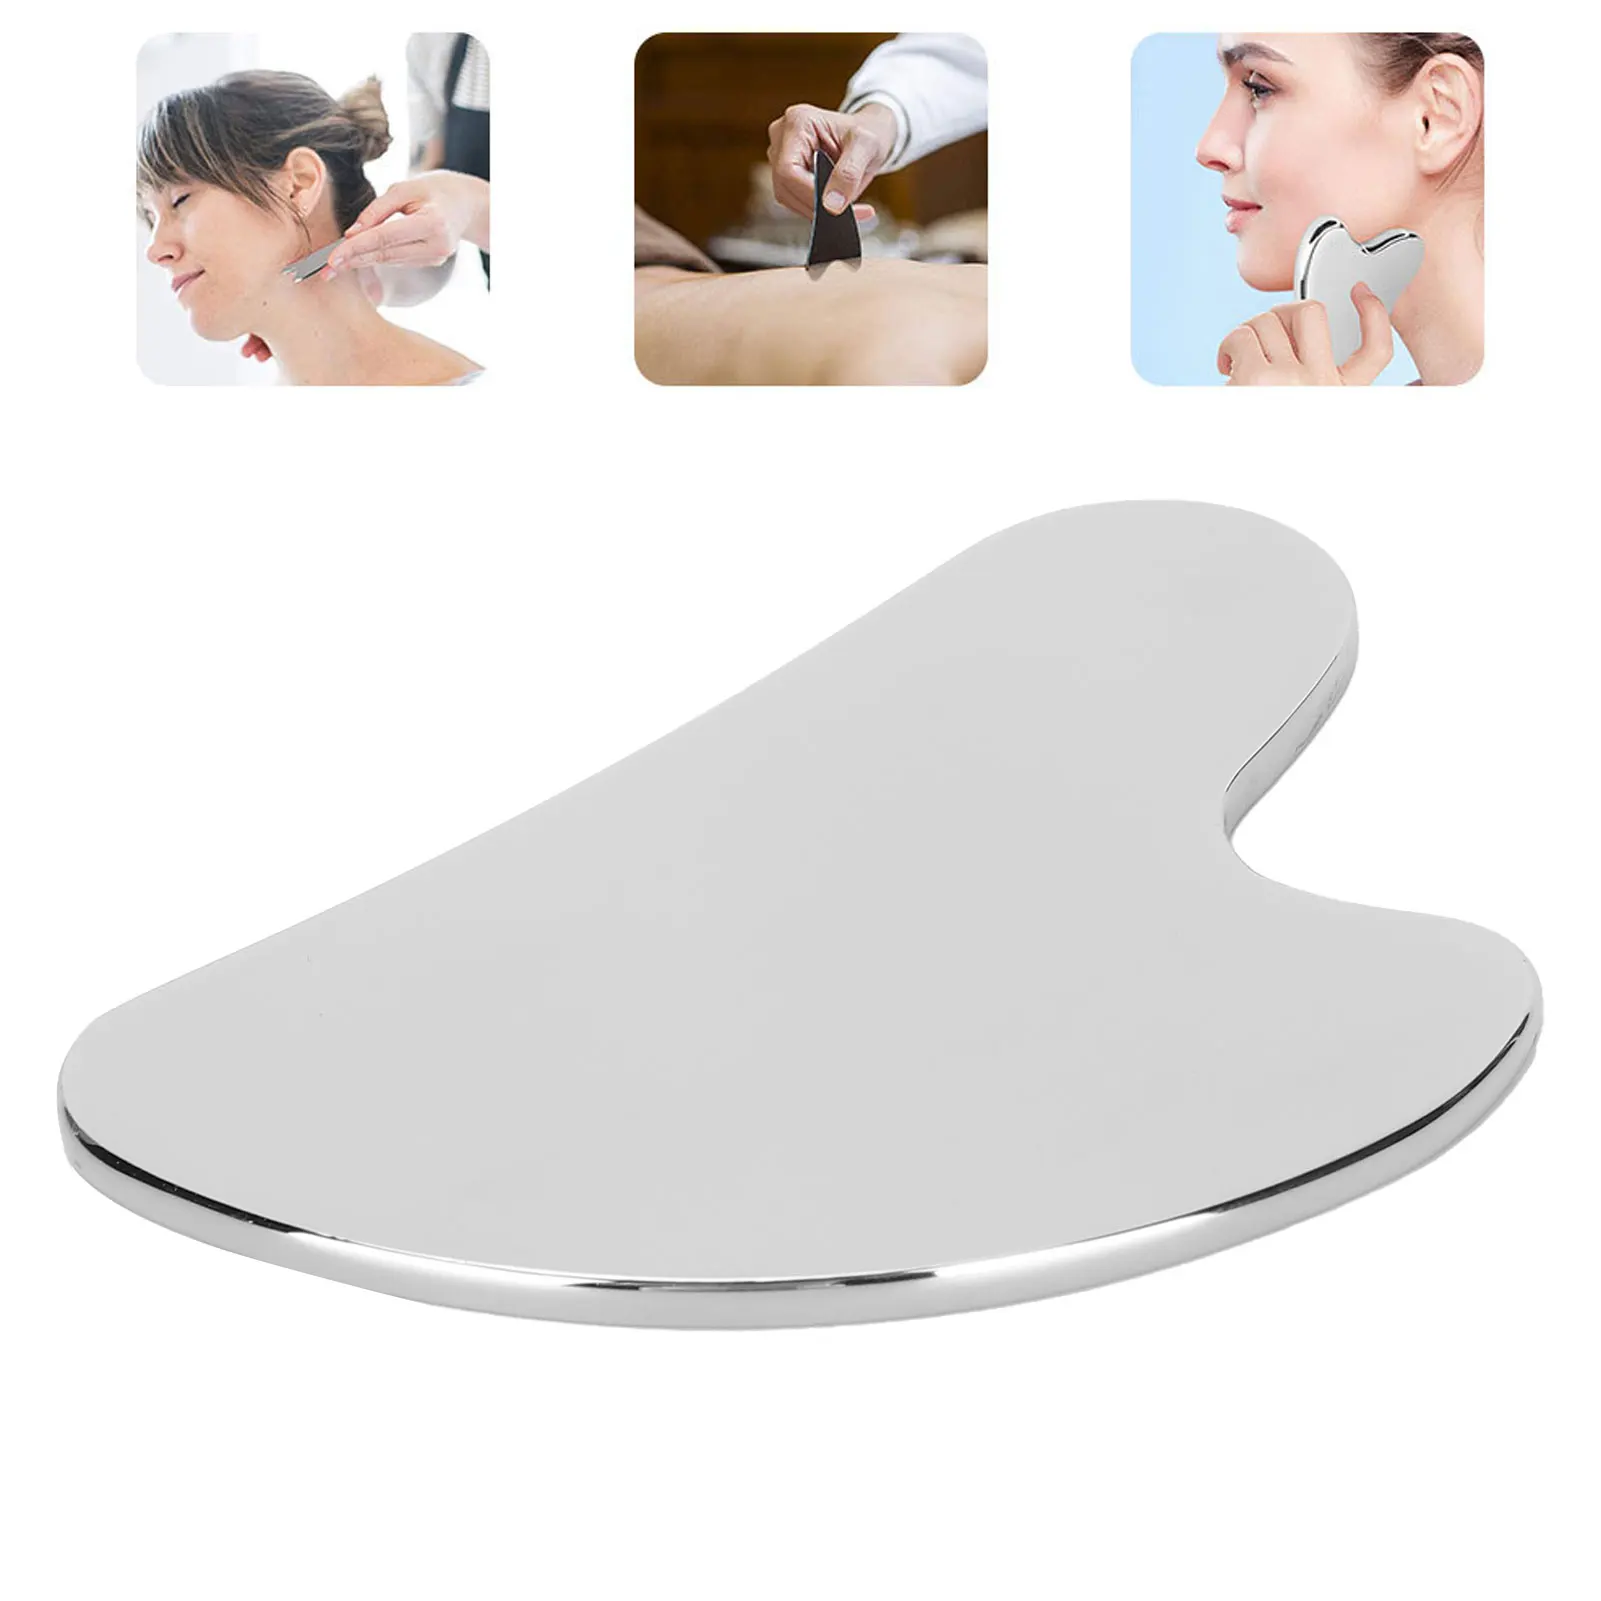 304 Stainless Steel Manual Guasha Board Massager Relaxation Soft Tissue Fatigue Relief Scraping Tool